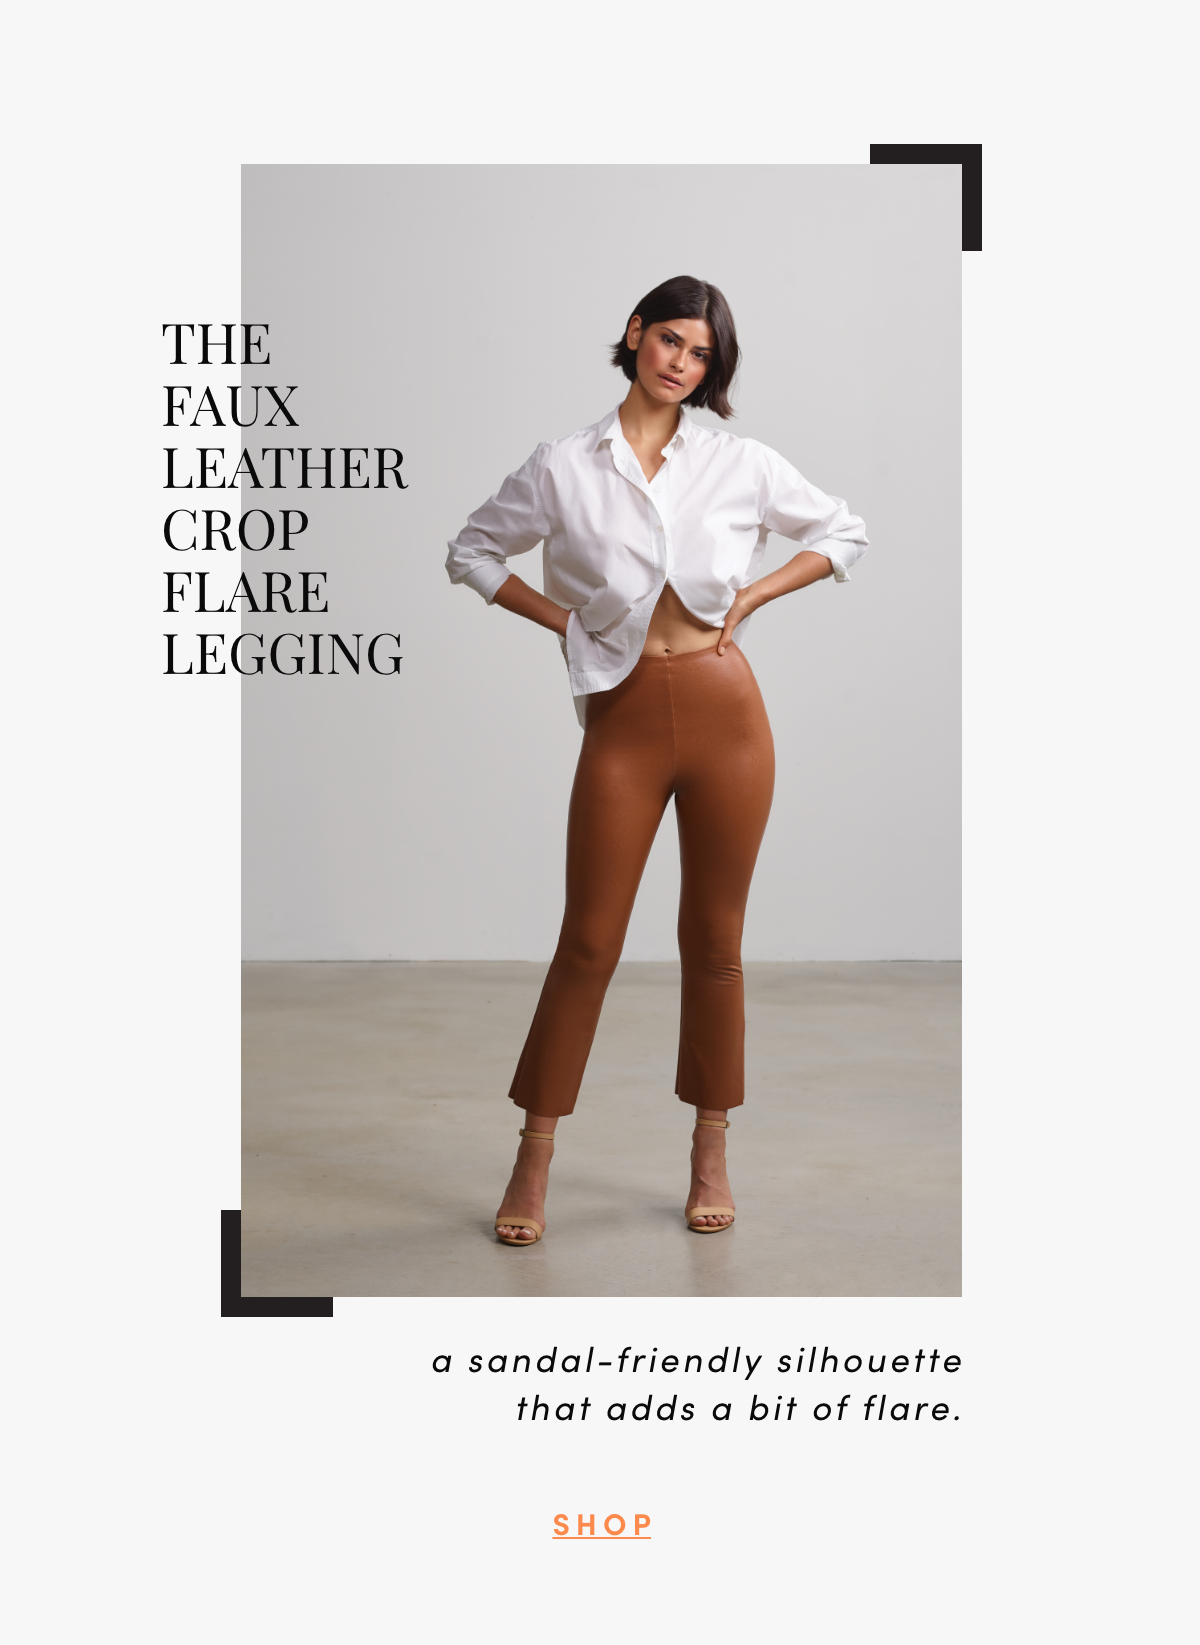 The Faux Leather Crop Flare Legging